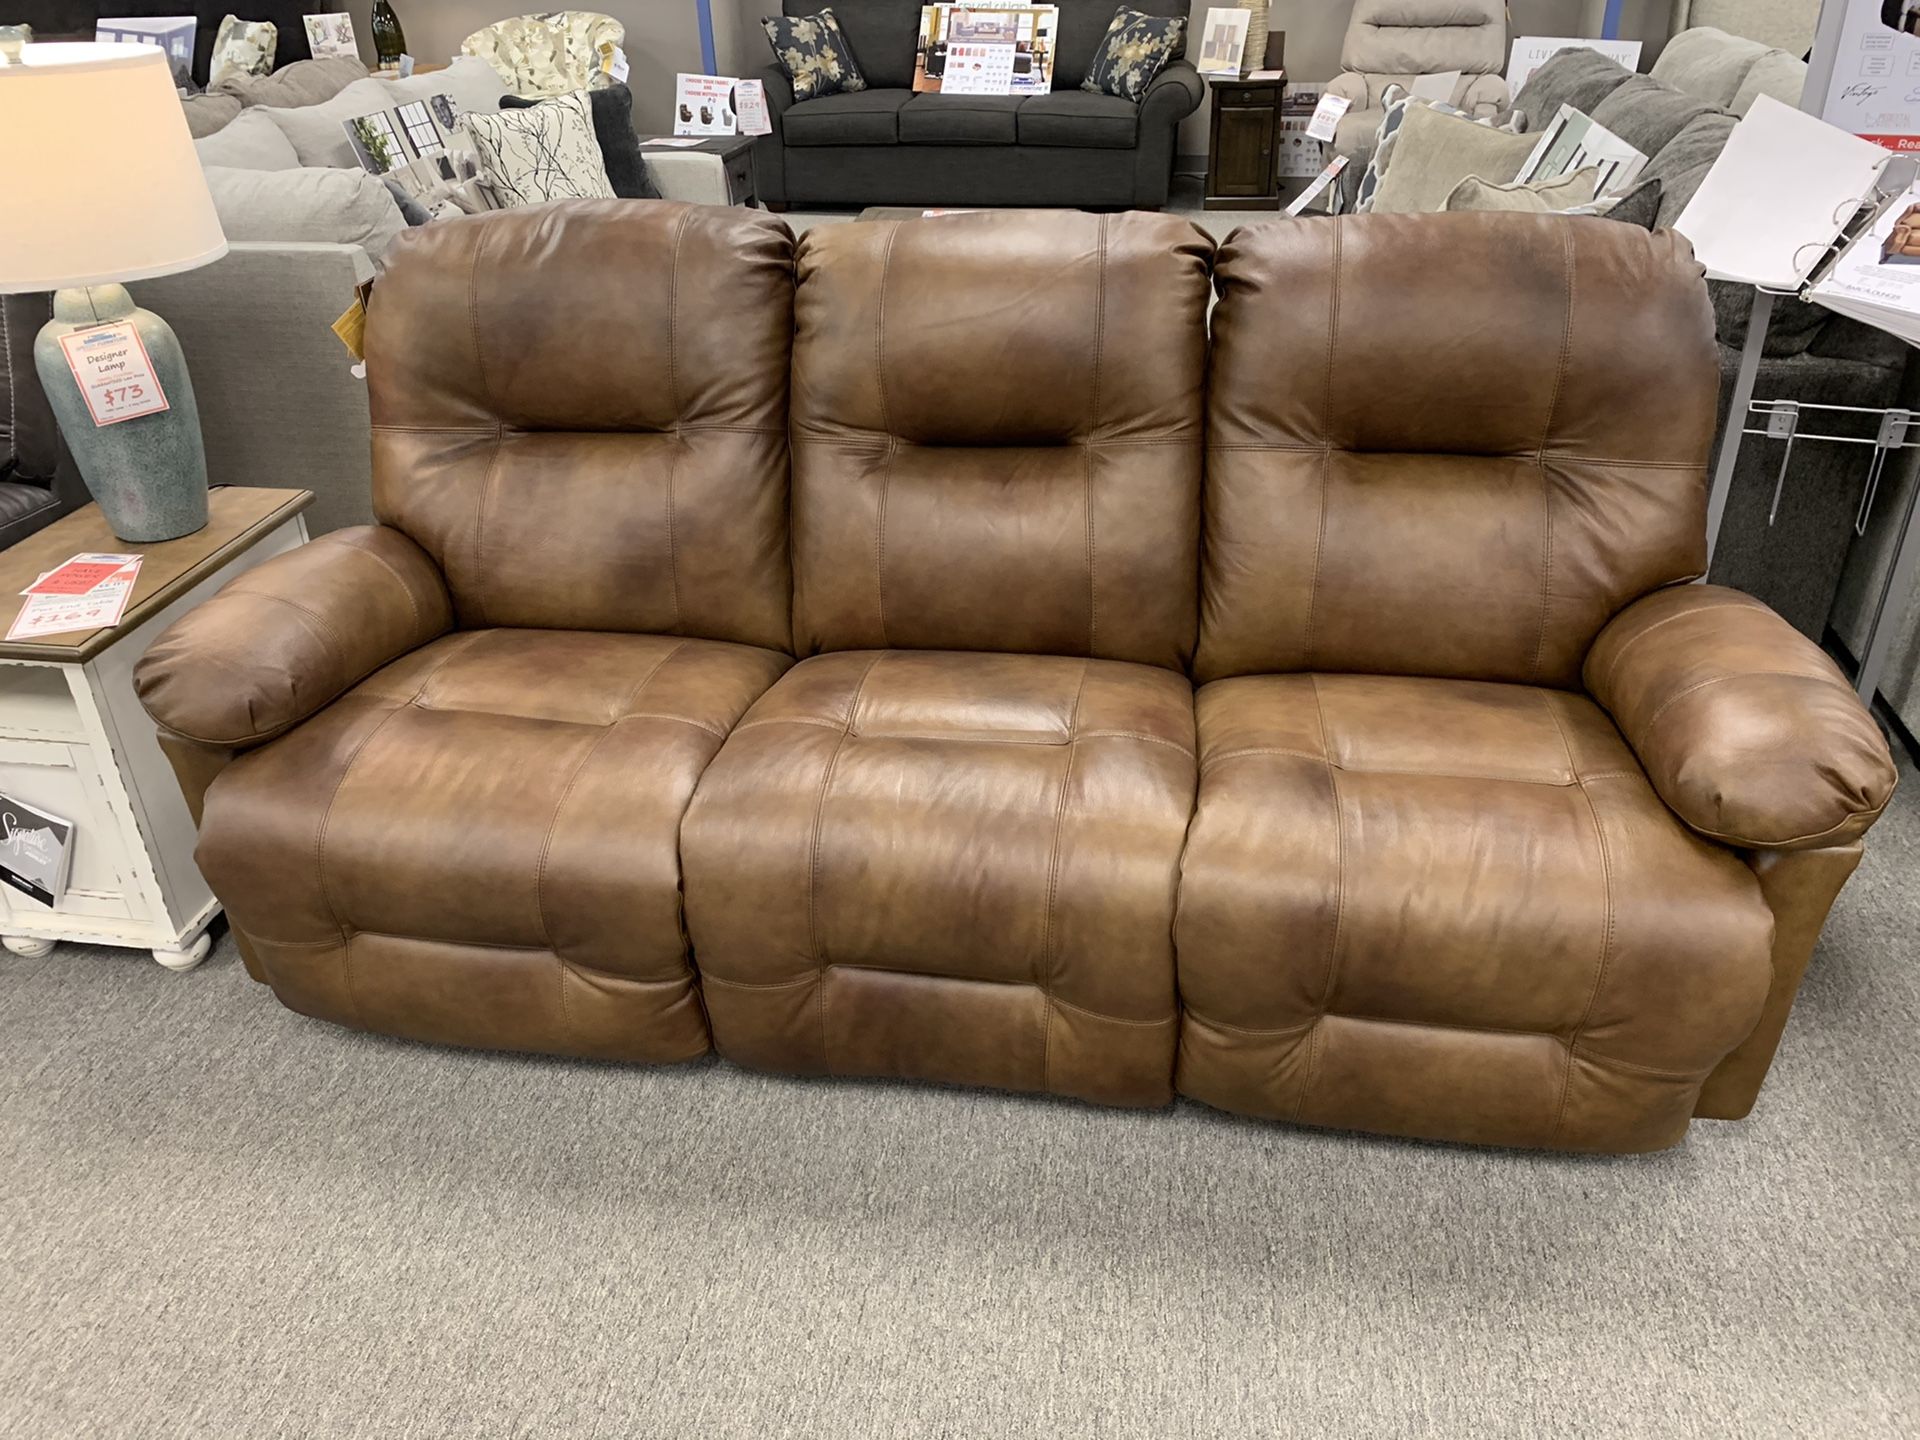 Custom made leather reclining sofa! Floor model clearance! Take home today!